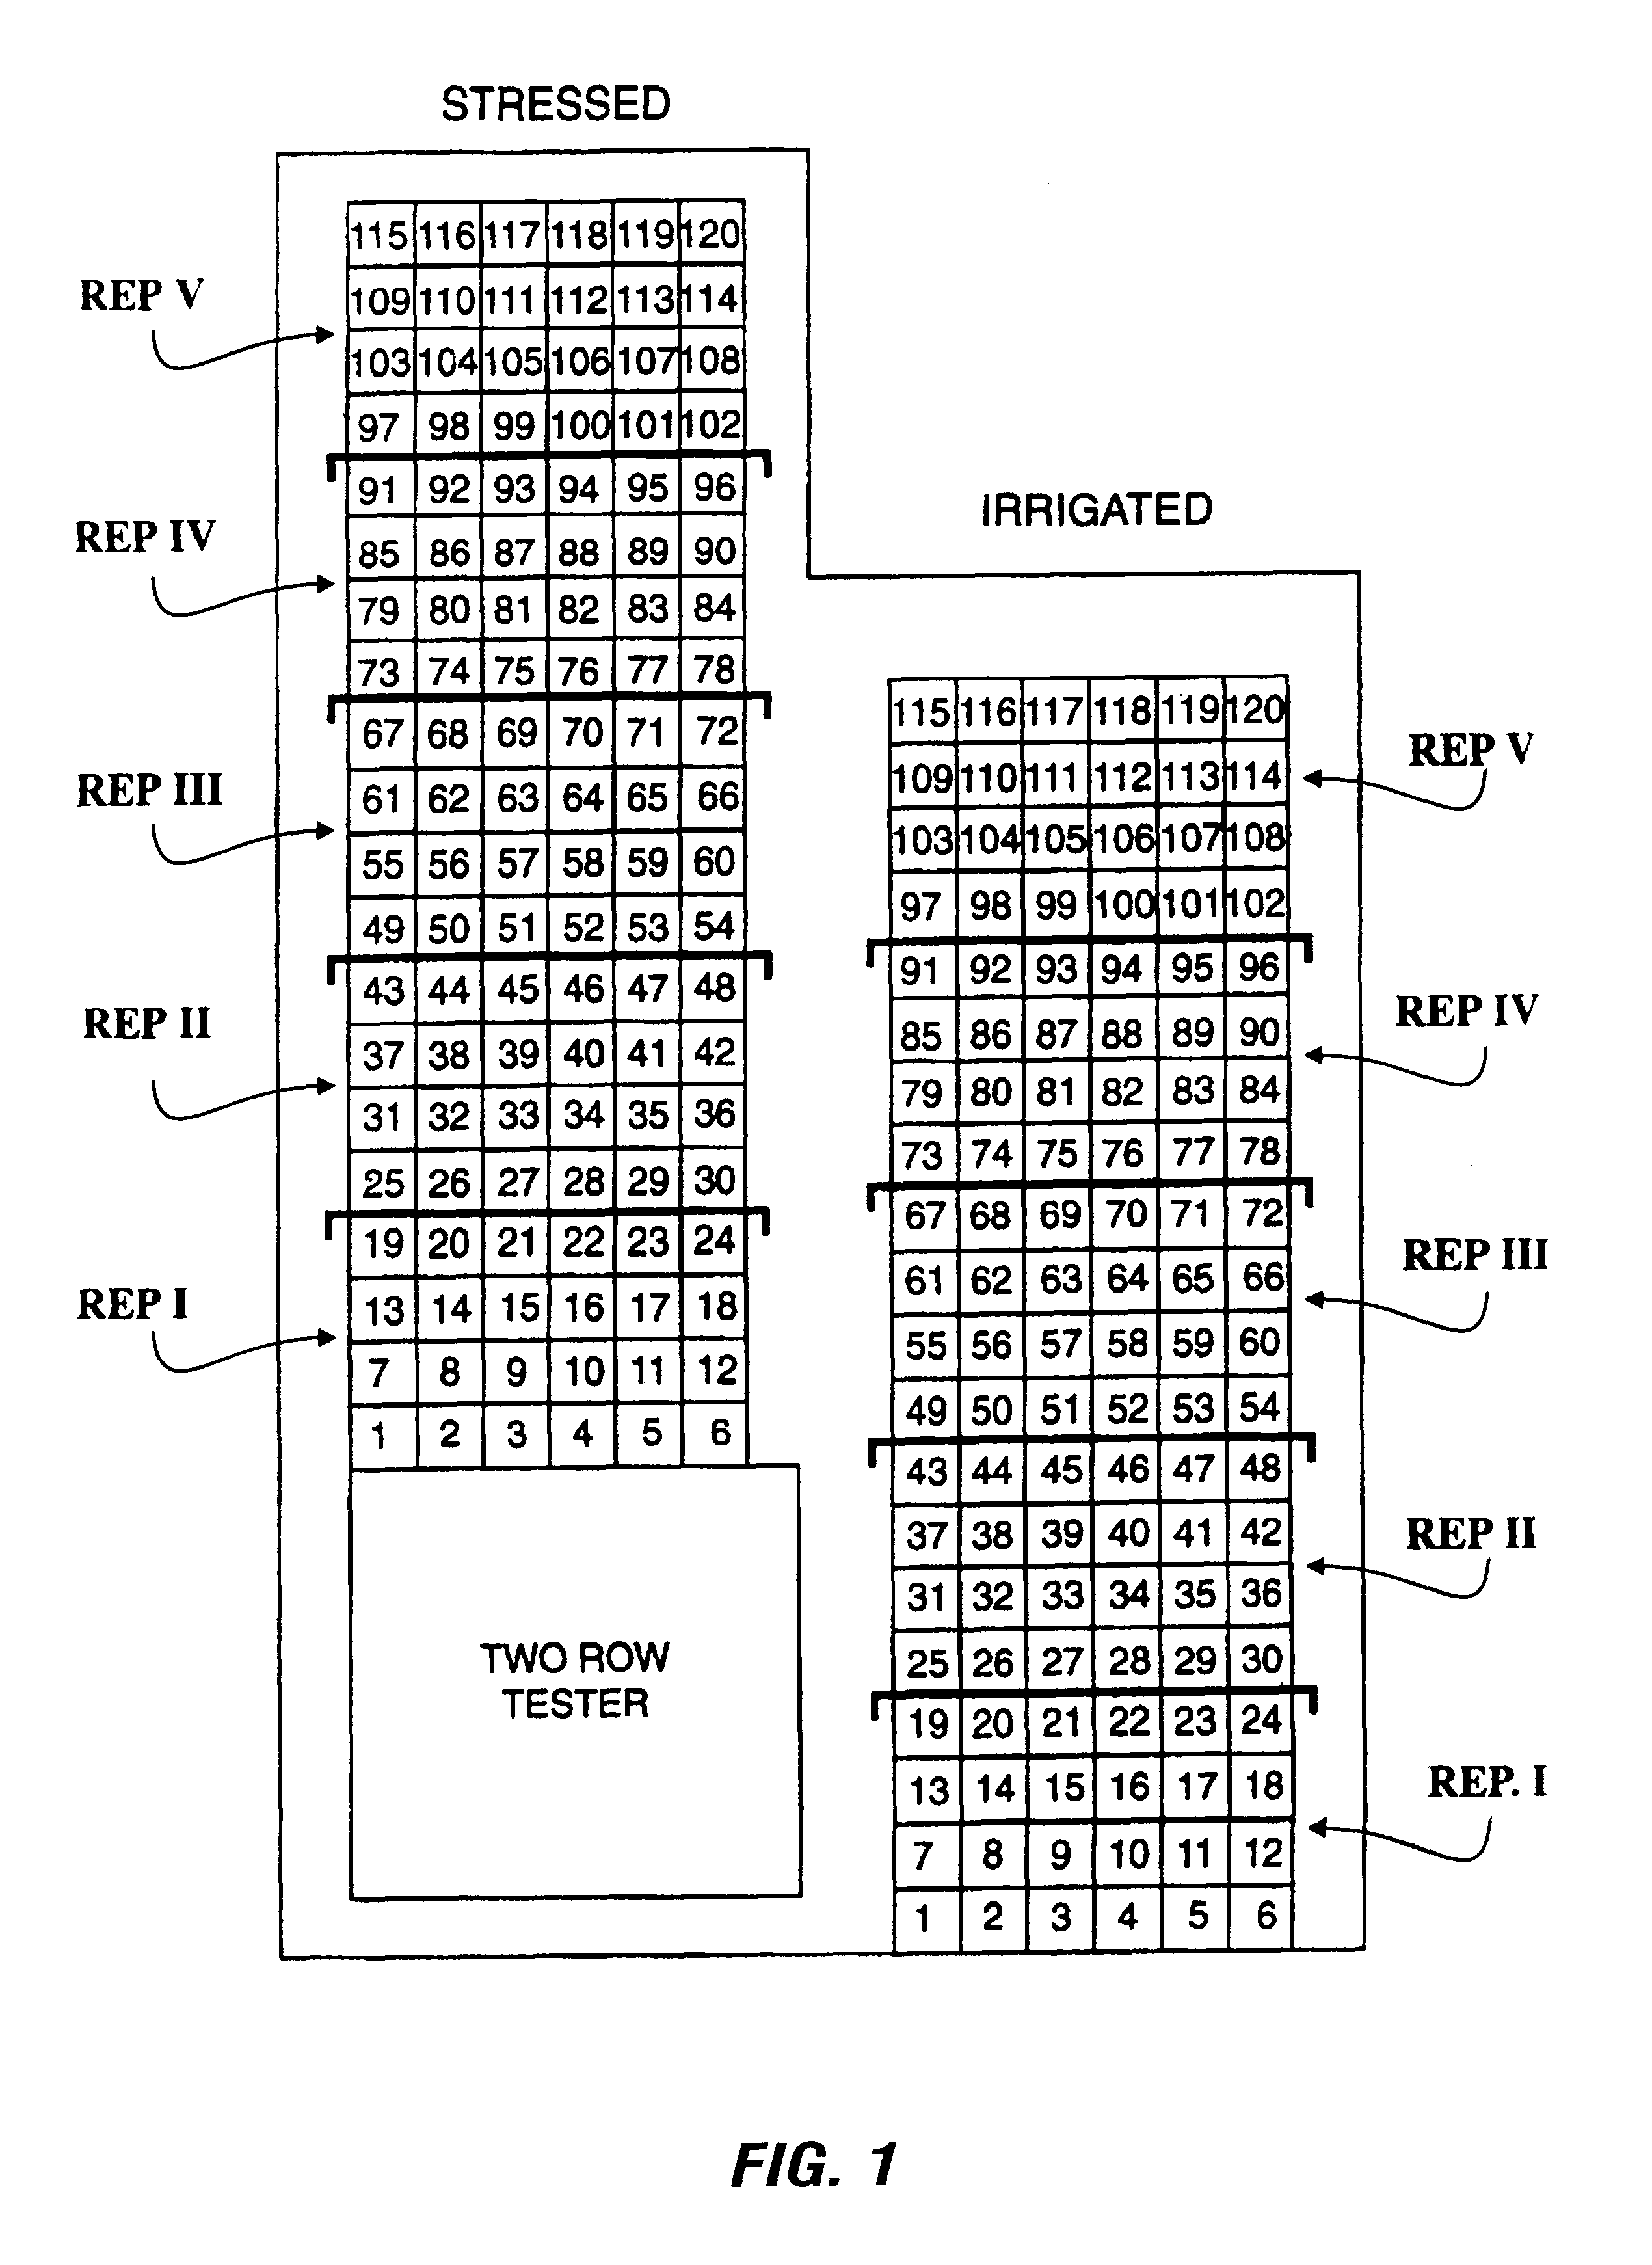 Methods for classifying plants for evaluation and breeding programs by use of remote sensing and image analysis technology